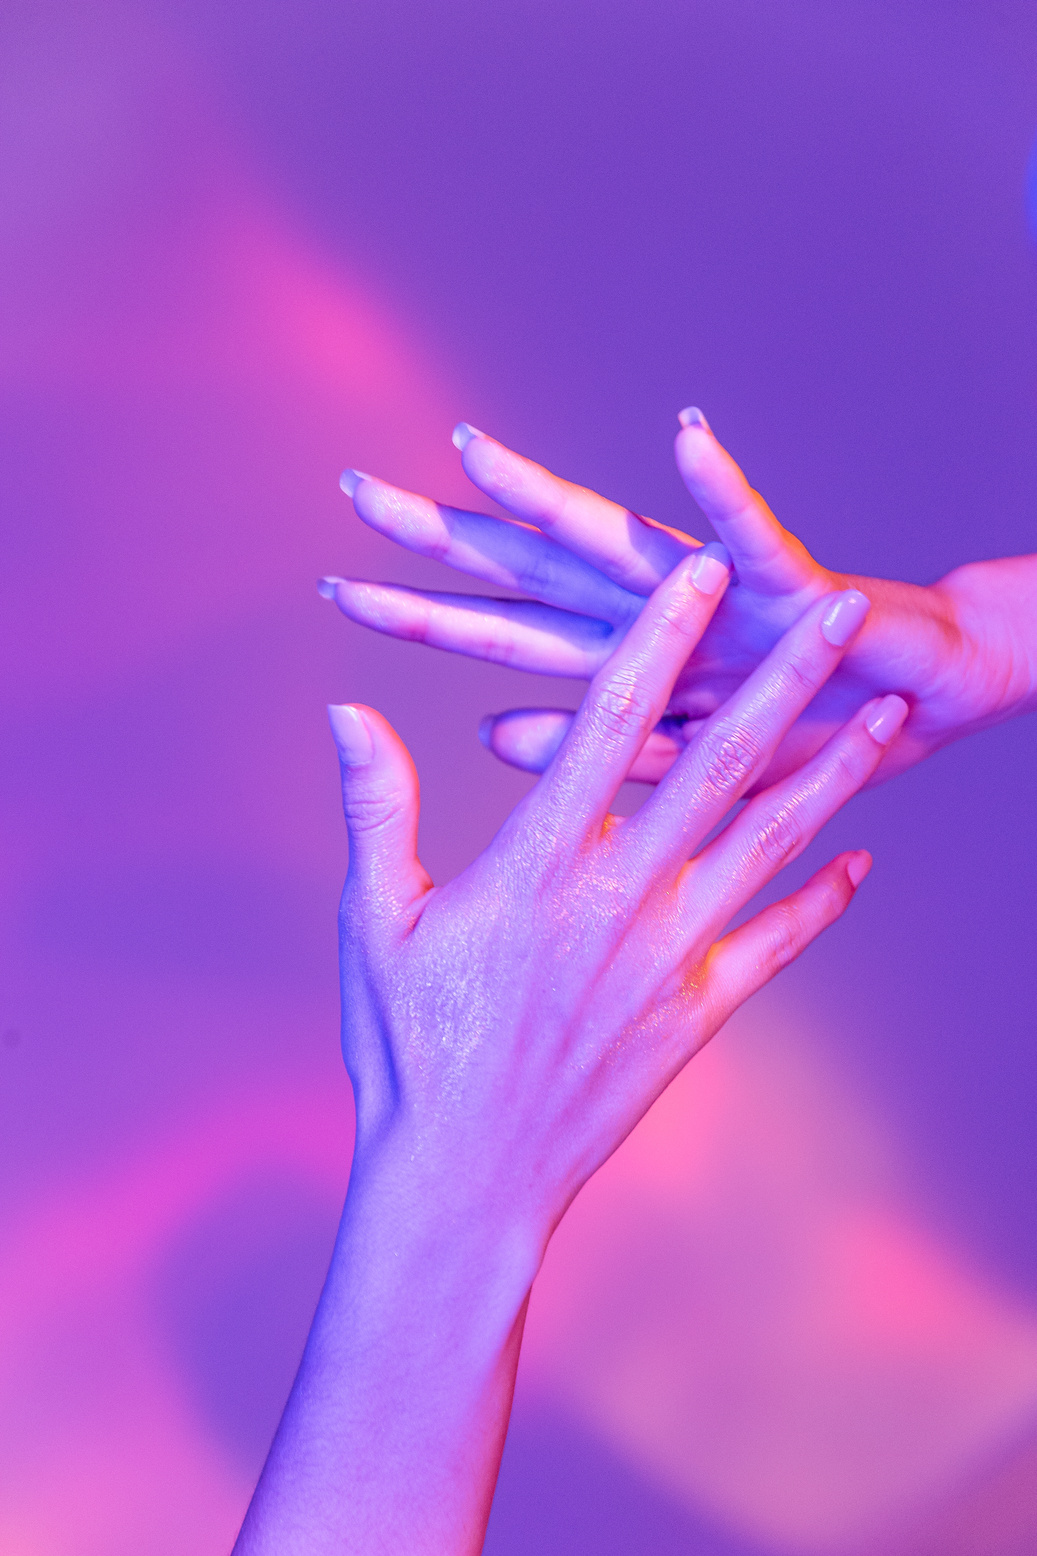 Hands Touching on Neon Lights